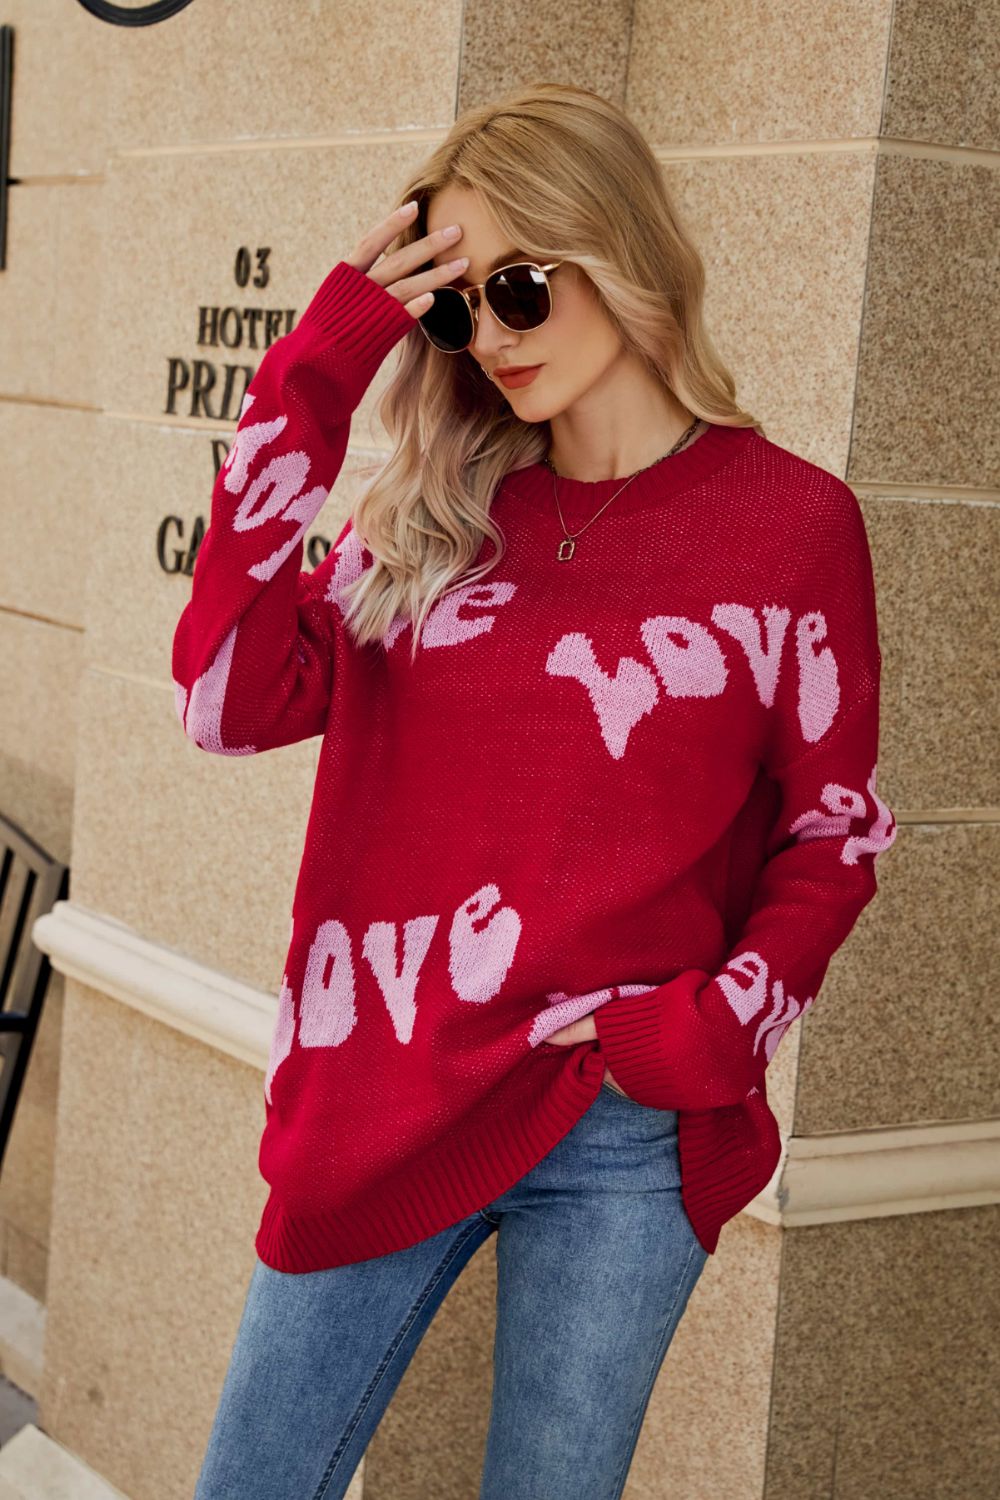 Groovy Love Slouch Sweater in Black or Red